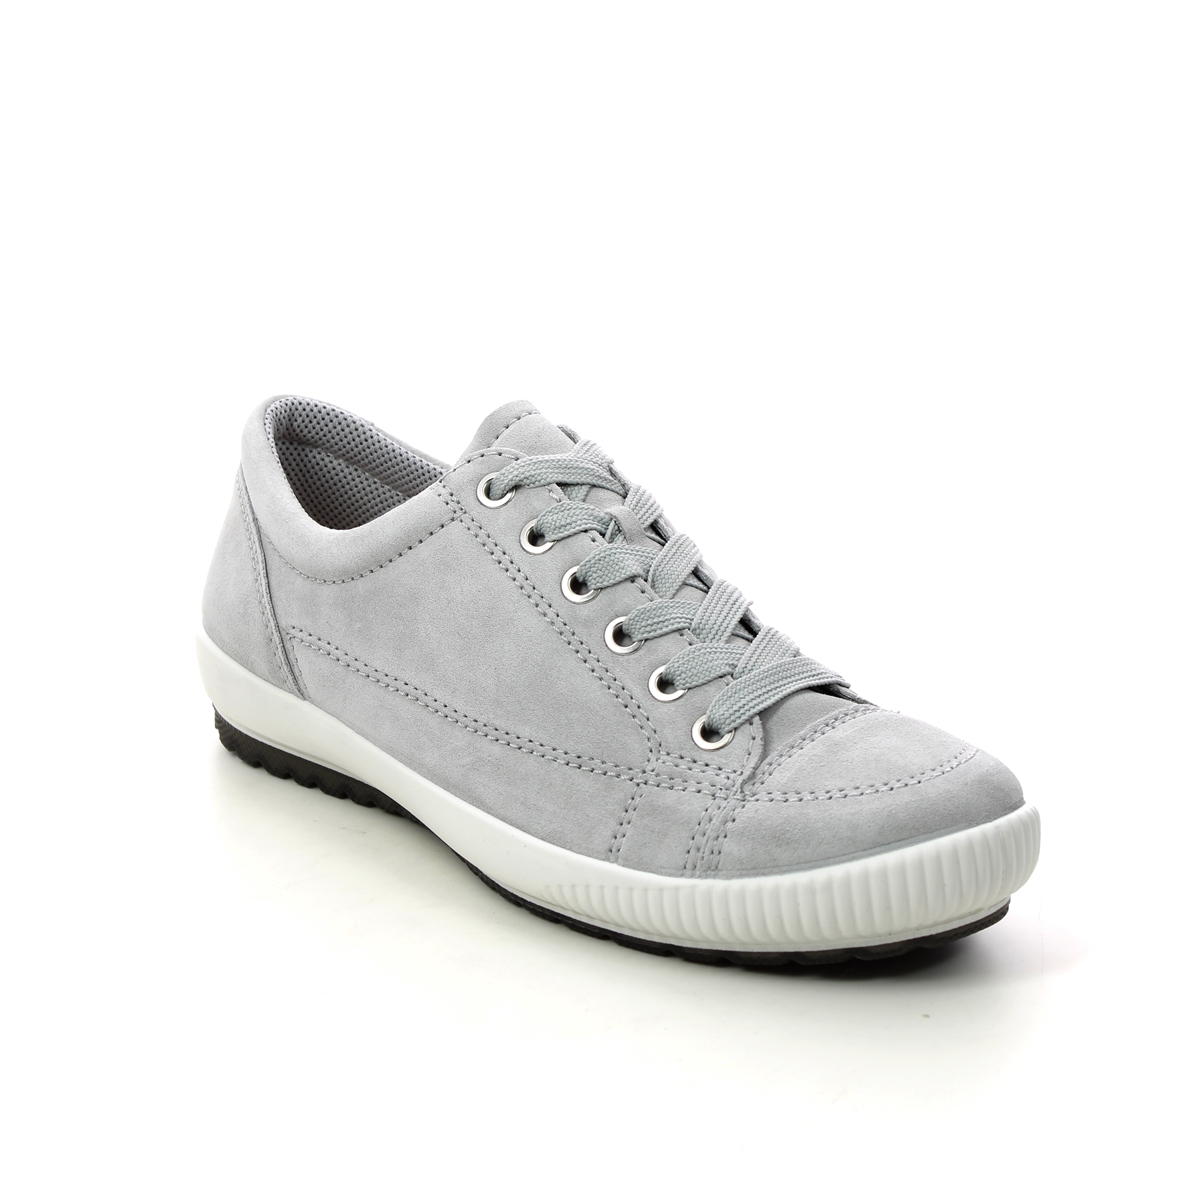 Legero Tanaro Stitch Light Grey Suede Womens Lacing Shoes 00820-25 In Size 7 In Plain Light Grey Suede